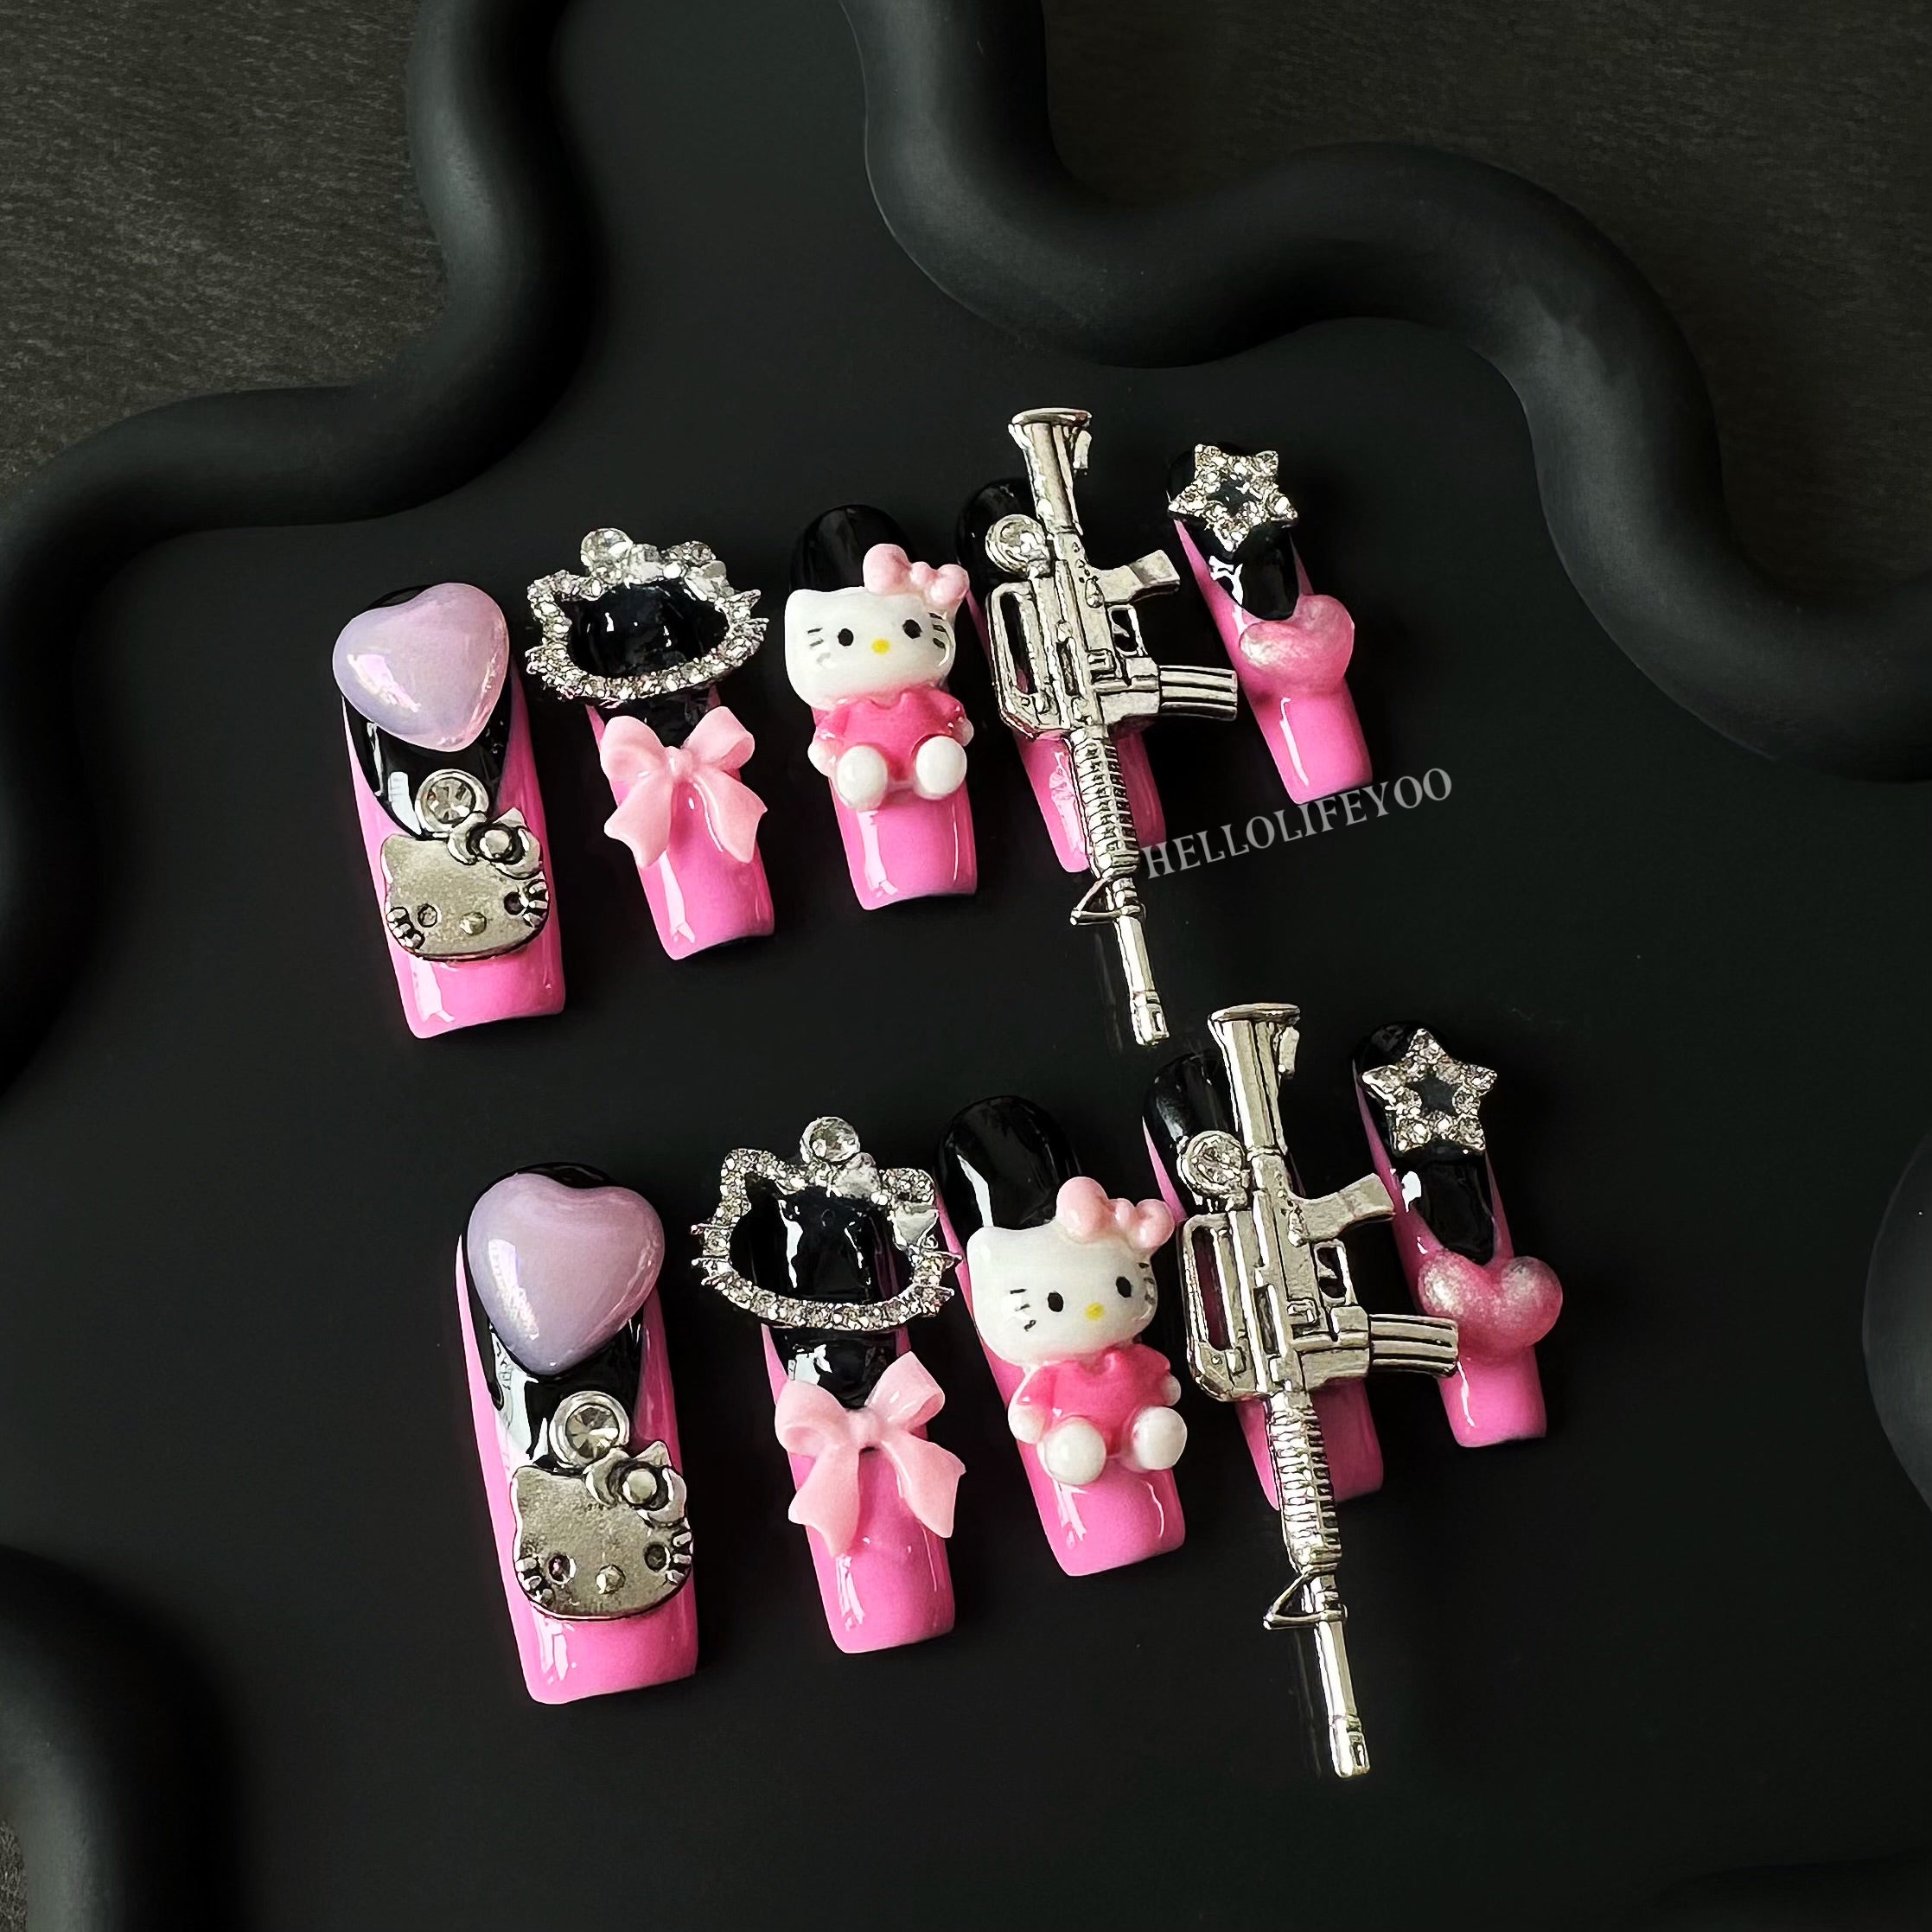 SANIO Y2K HELLO KITTY-TEN PIECES OF HANDCRAFTED PRESS ON NAIL